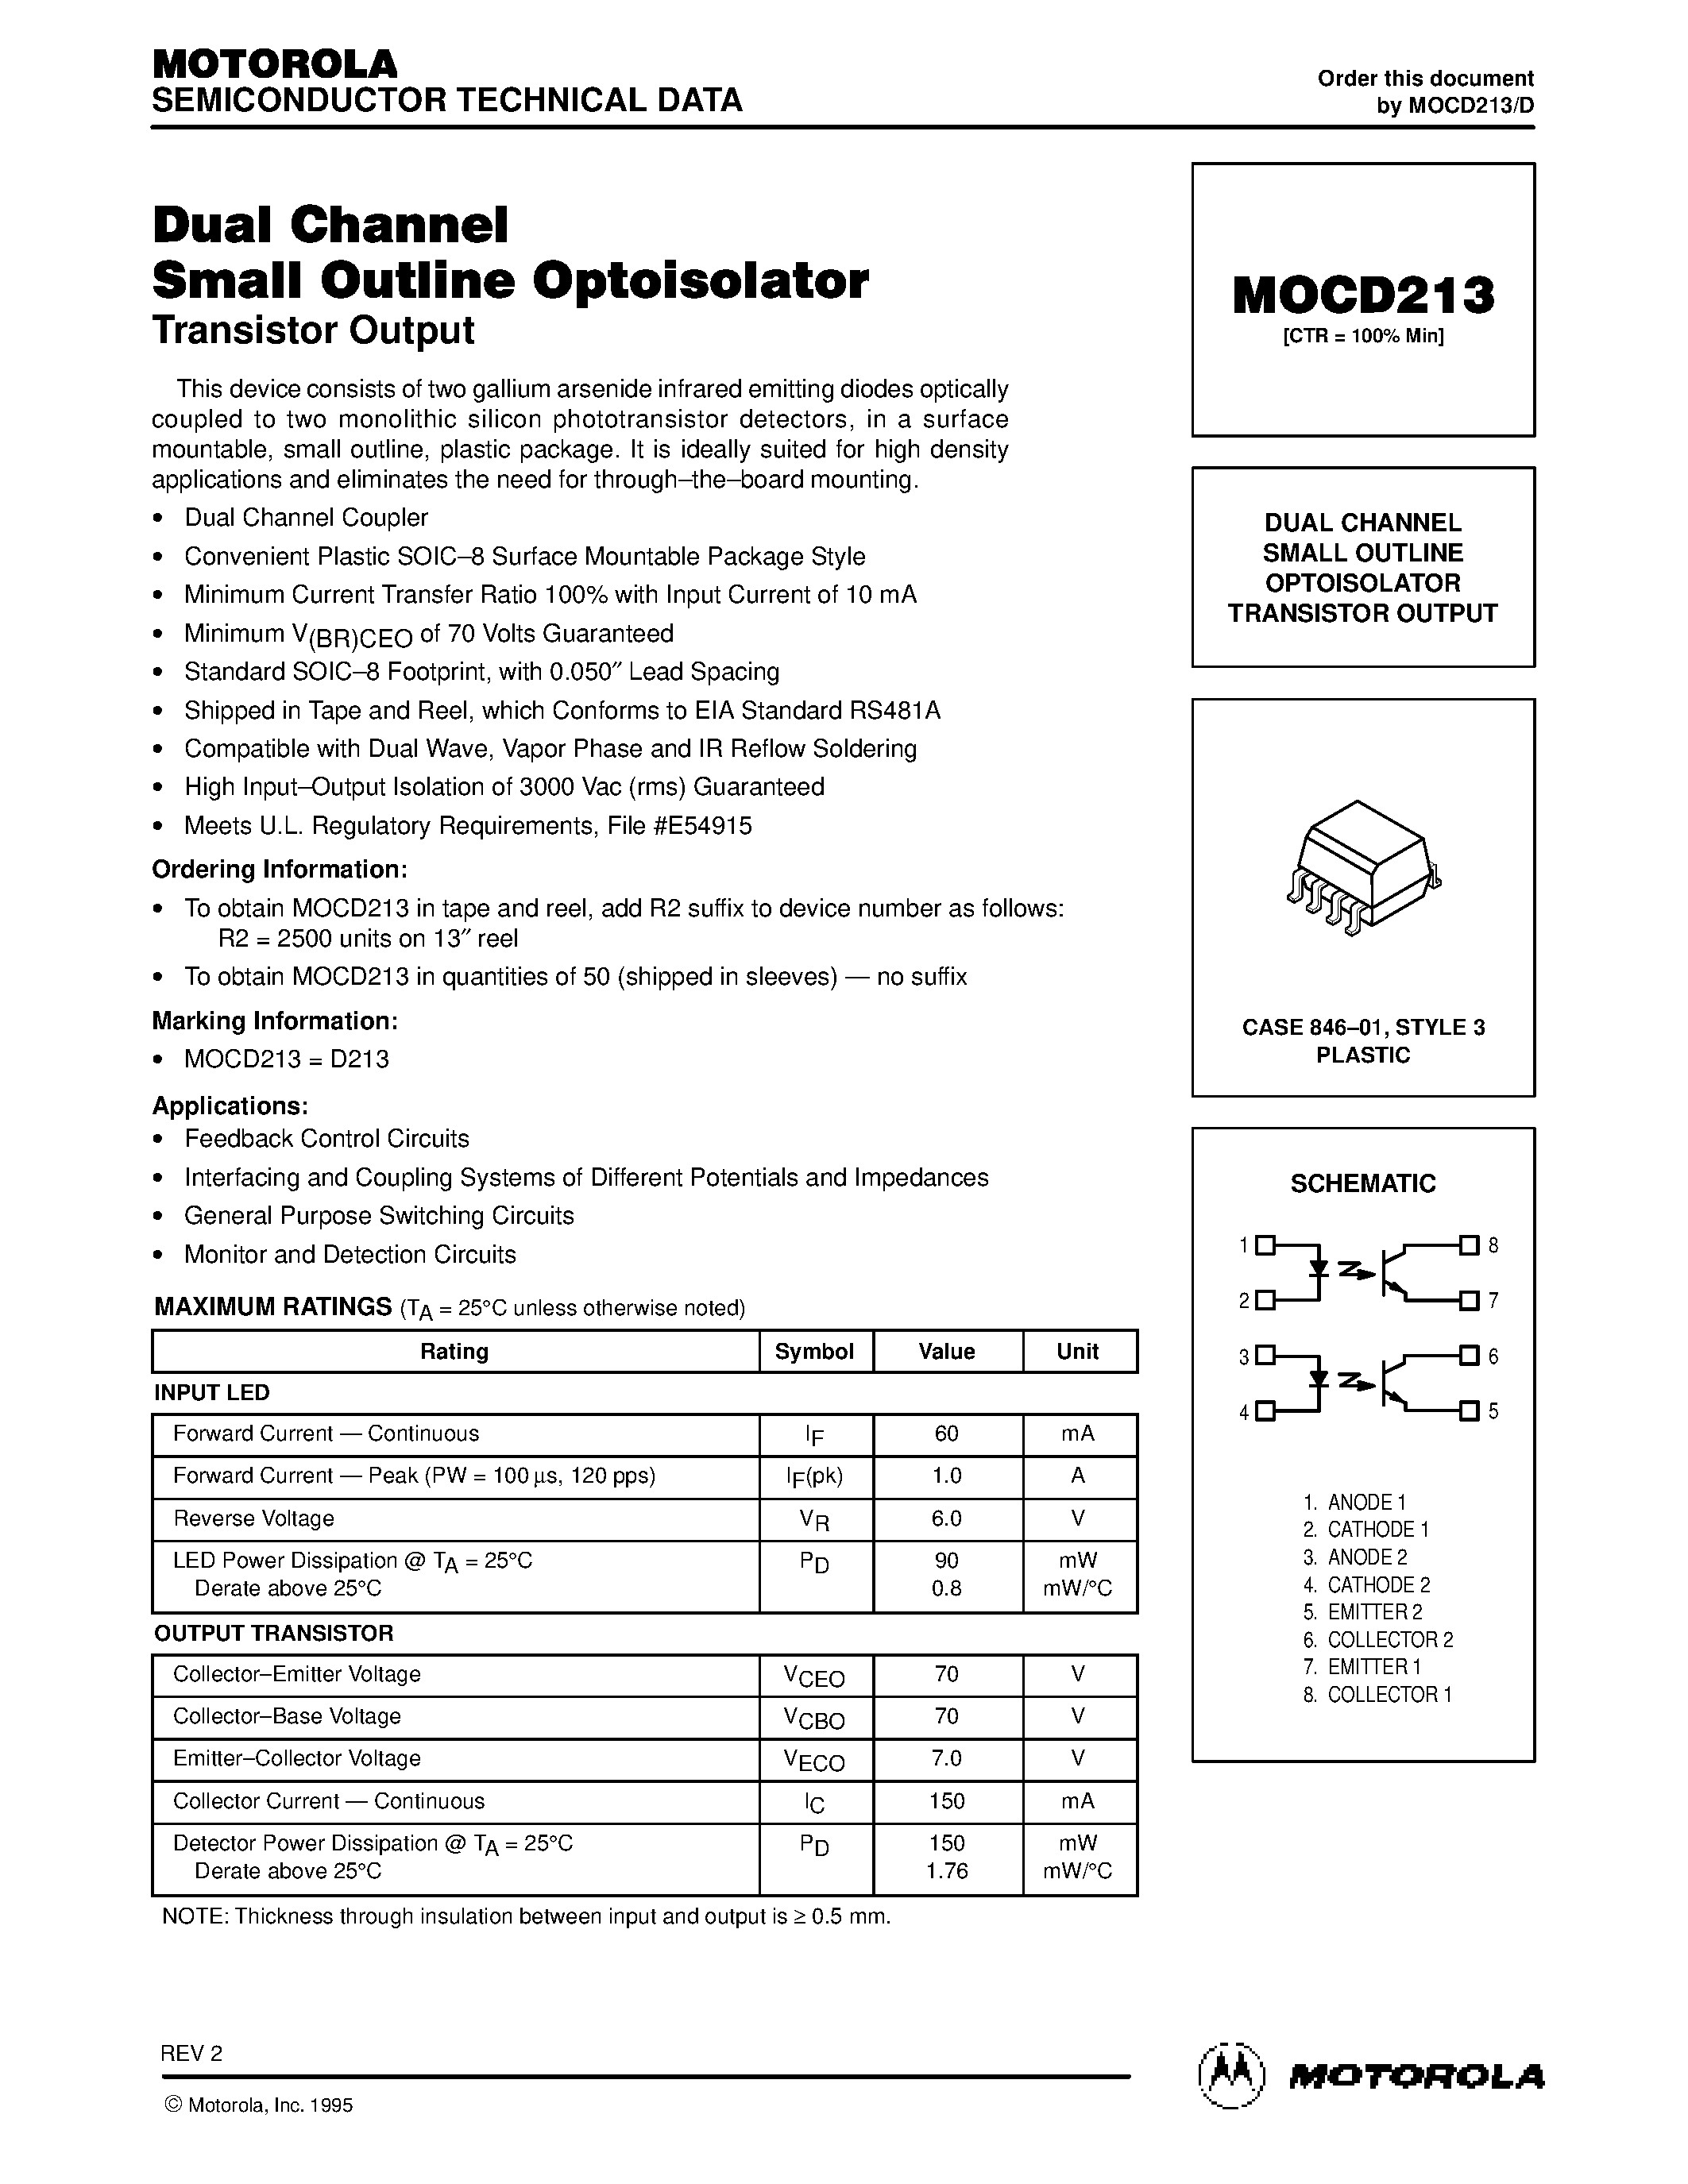 Datasheet MOCD213 - DUAL CHANNEL SMALL OUTLINE OPTOISOLATOR TRANSISTOR OUTPUT page 1